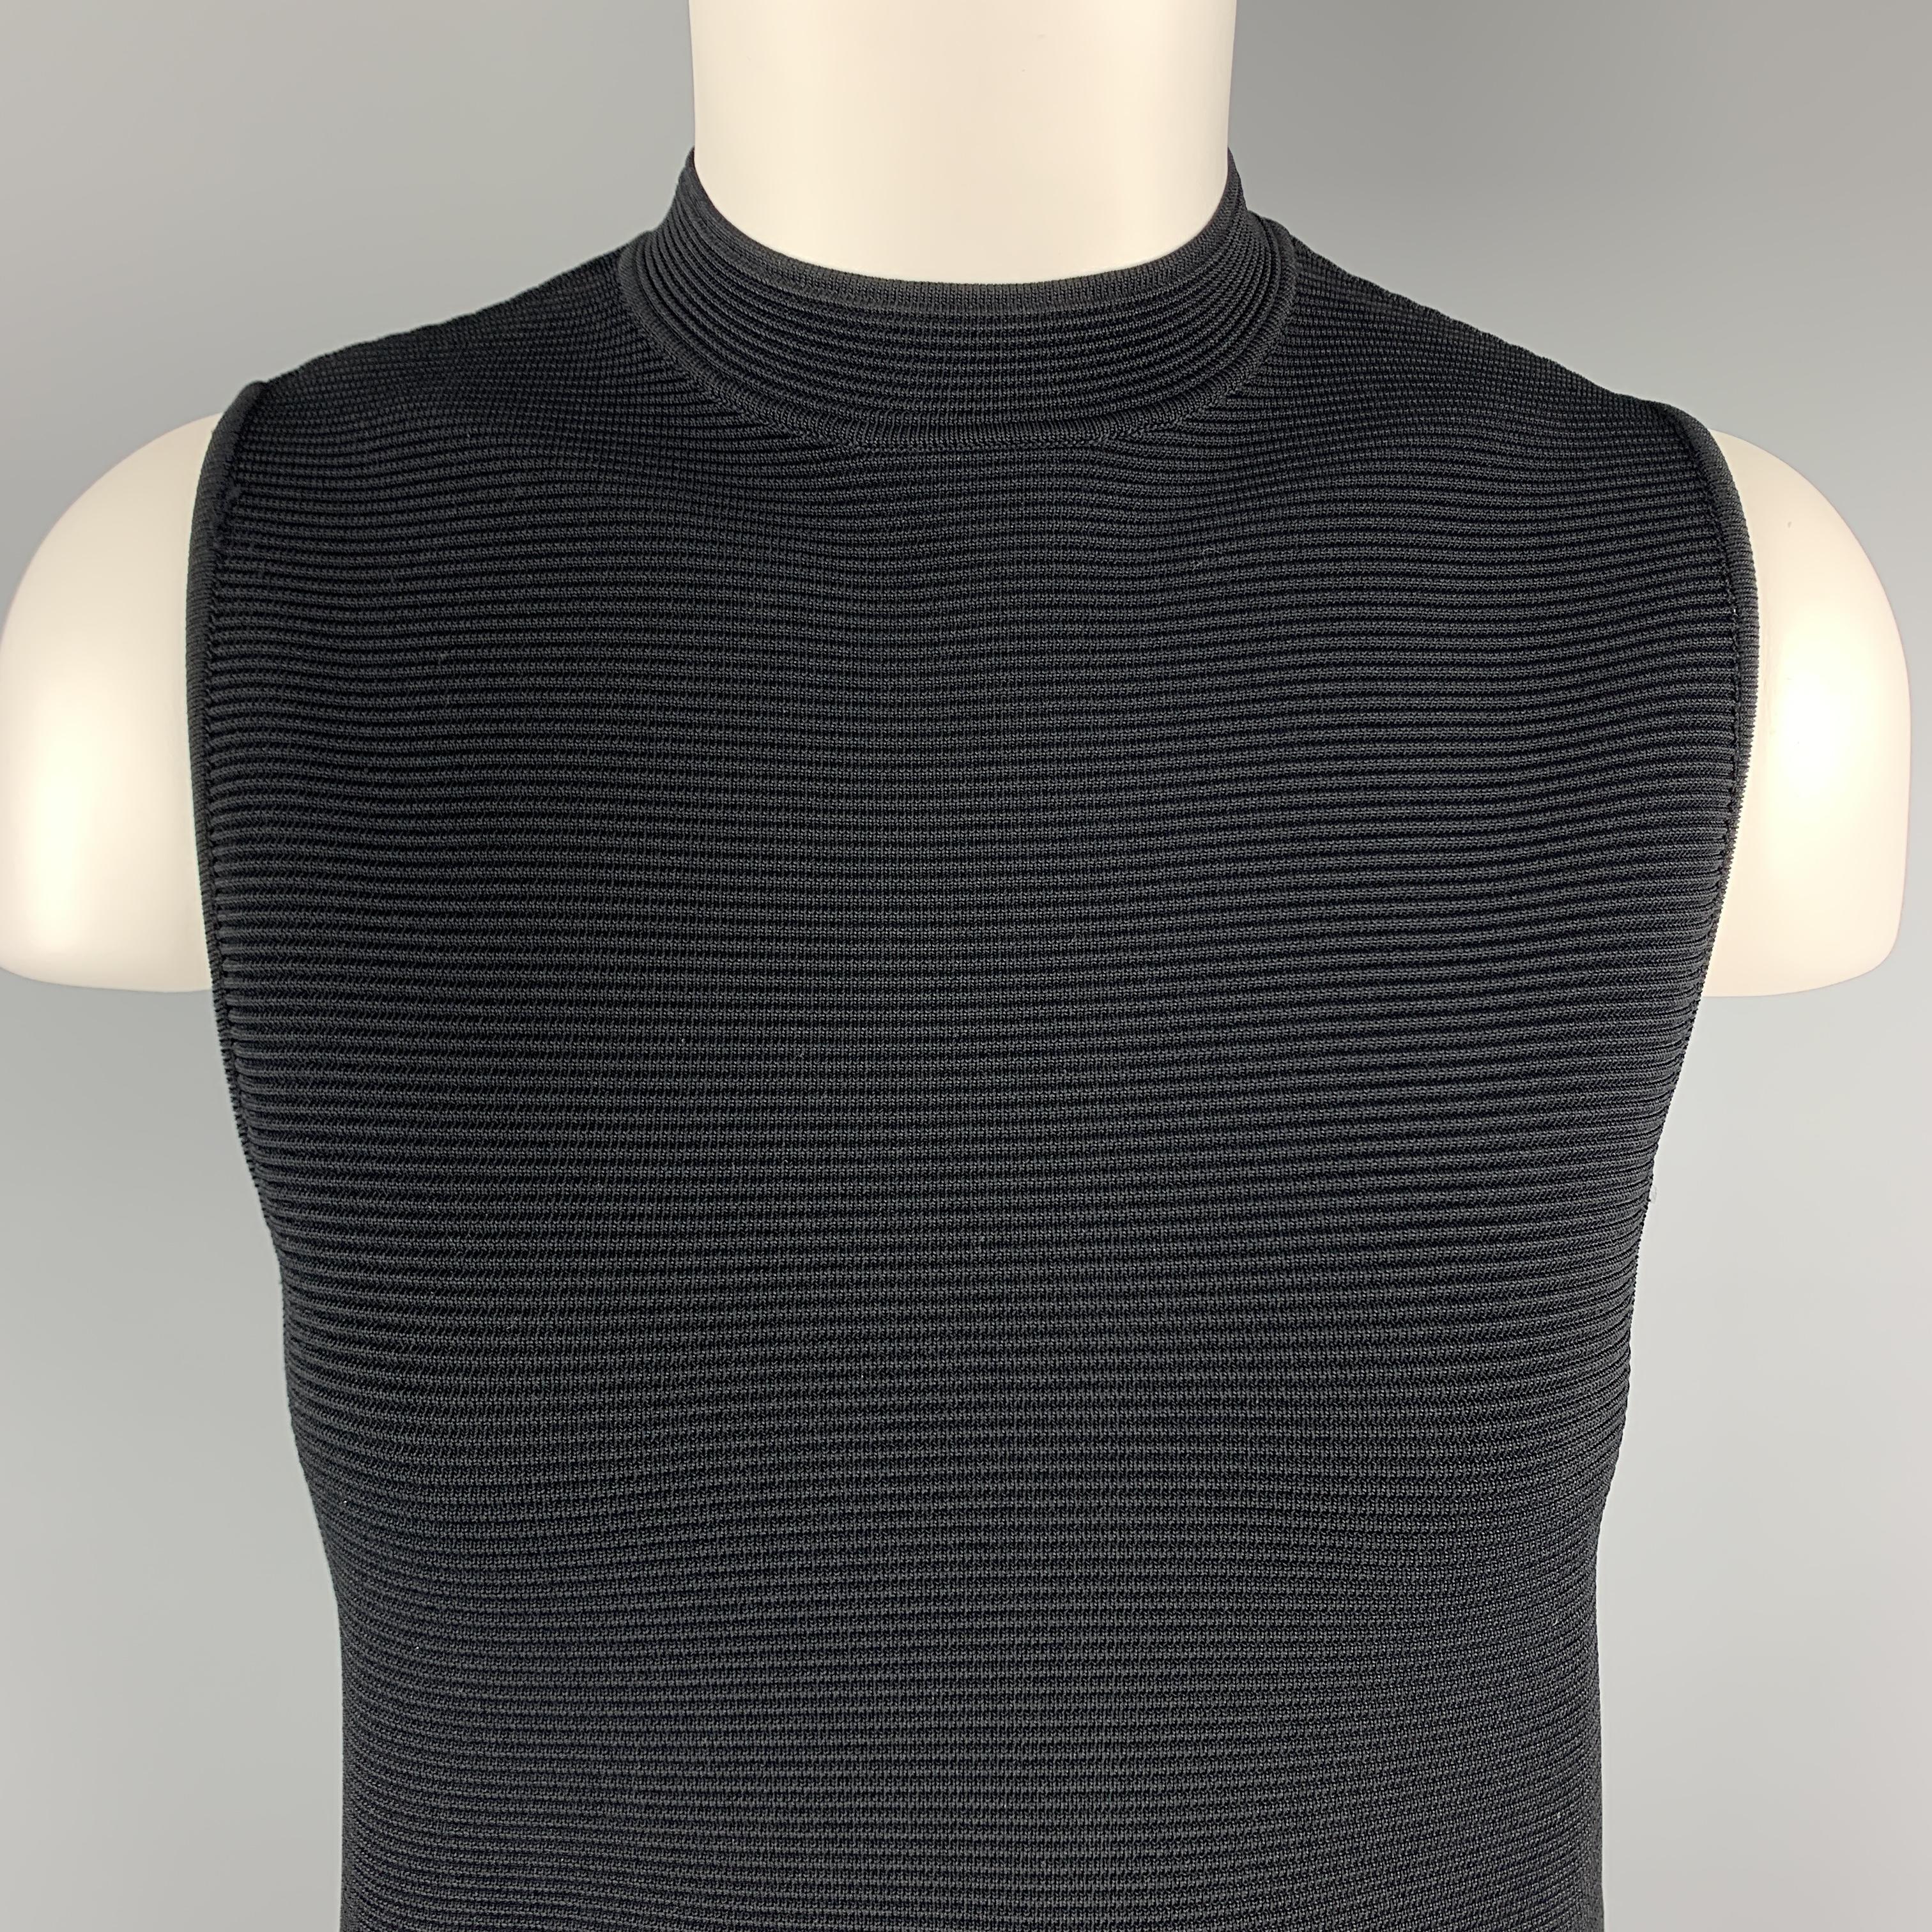 RALPH LAUREN COLLECTION shift dress comes in a structured ribbed textured viscose blend knit with an A line silhouette. Made in Italy.

Excellent Pre-Owned Condition.
Marked: S

Measurements:

Shoulder: 12.5 in.
Bust: 34 in.
Waist: 35 in.
Hip: 38